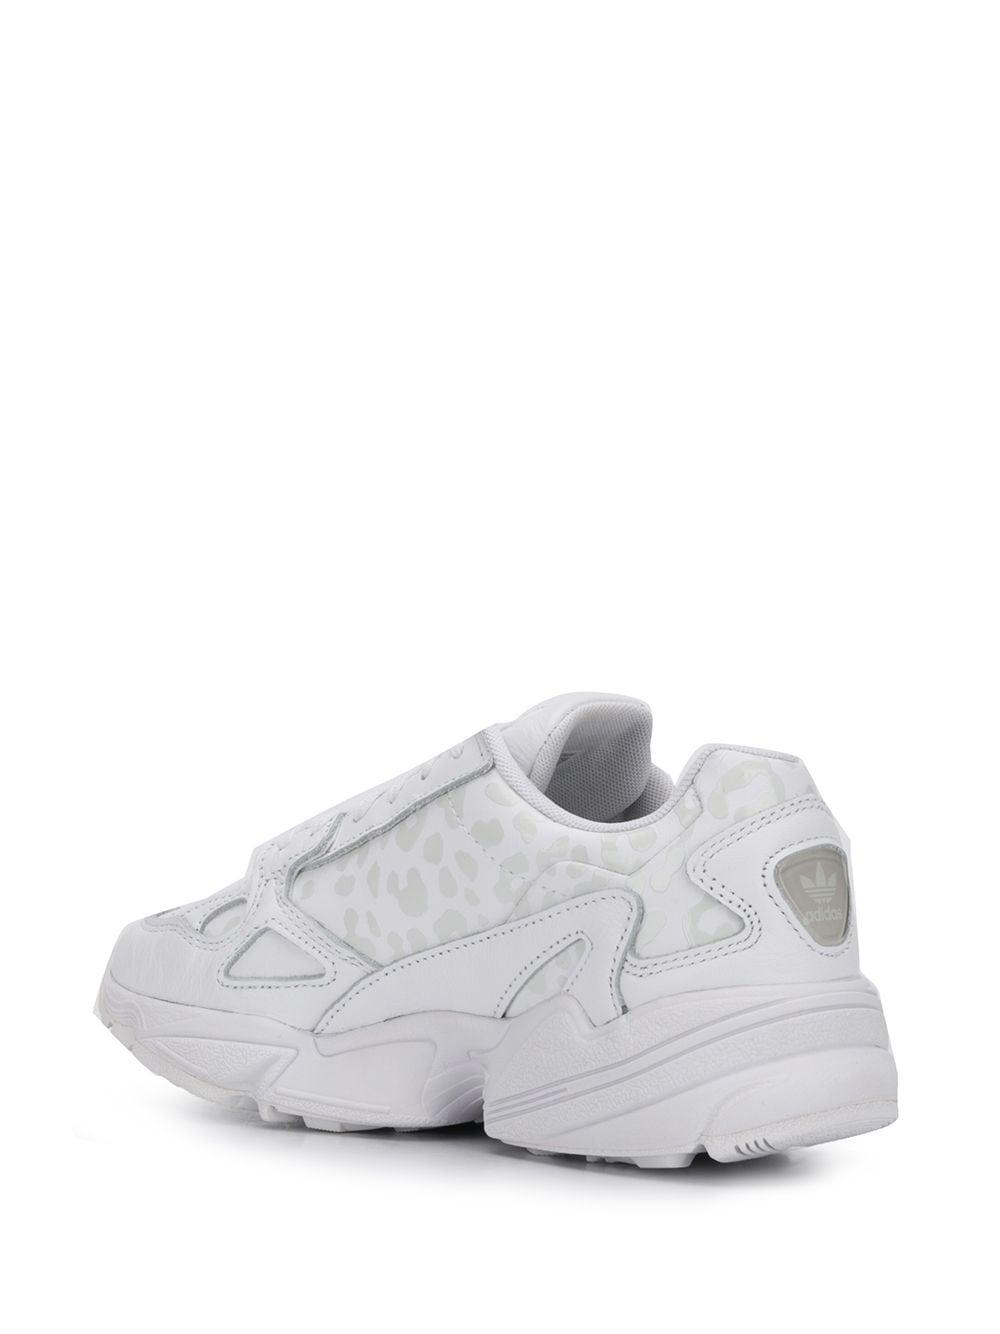 adidas Leather Falcon Leopard Print Sneakers in White - Lyst